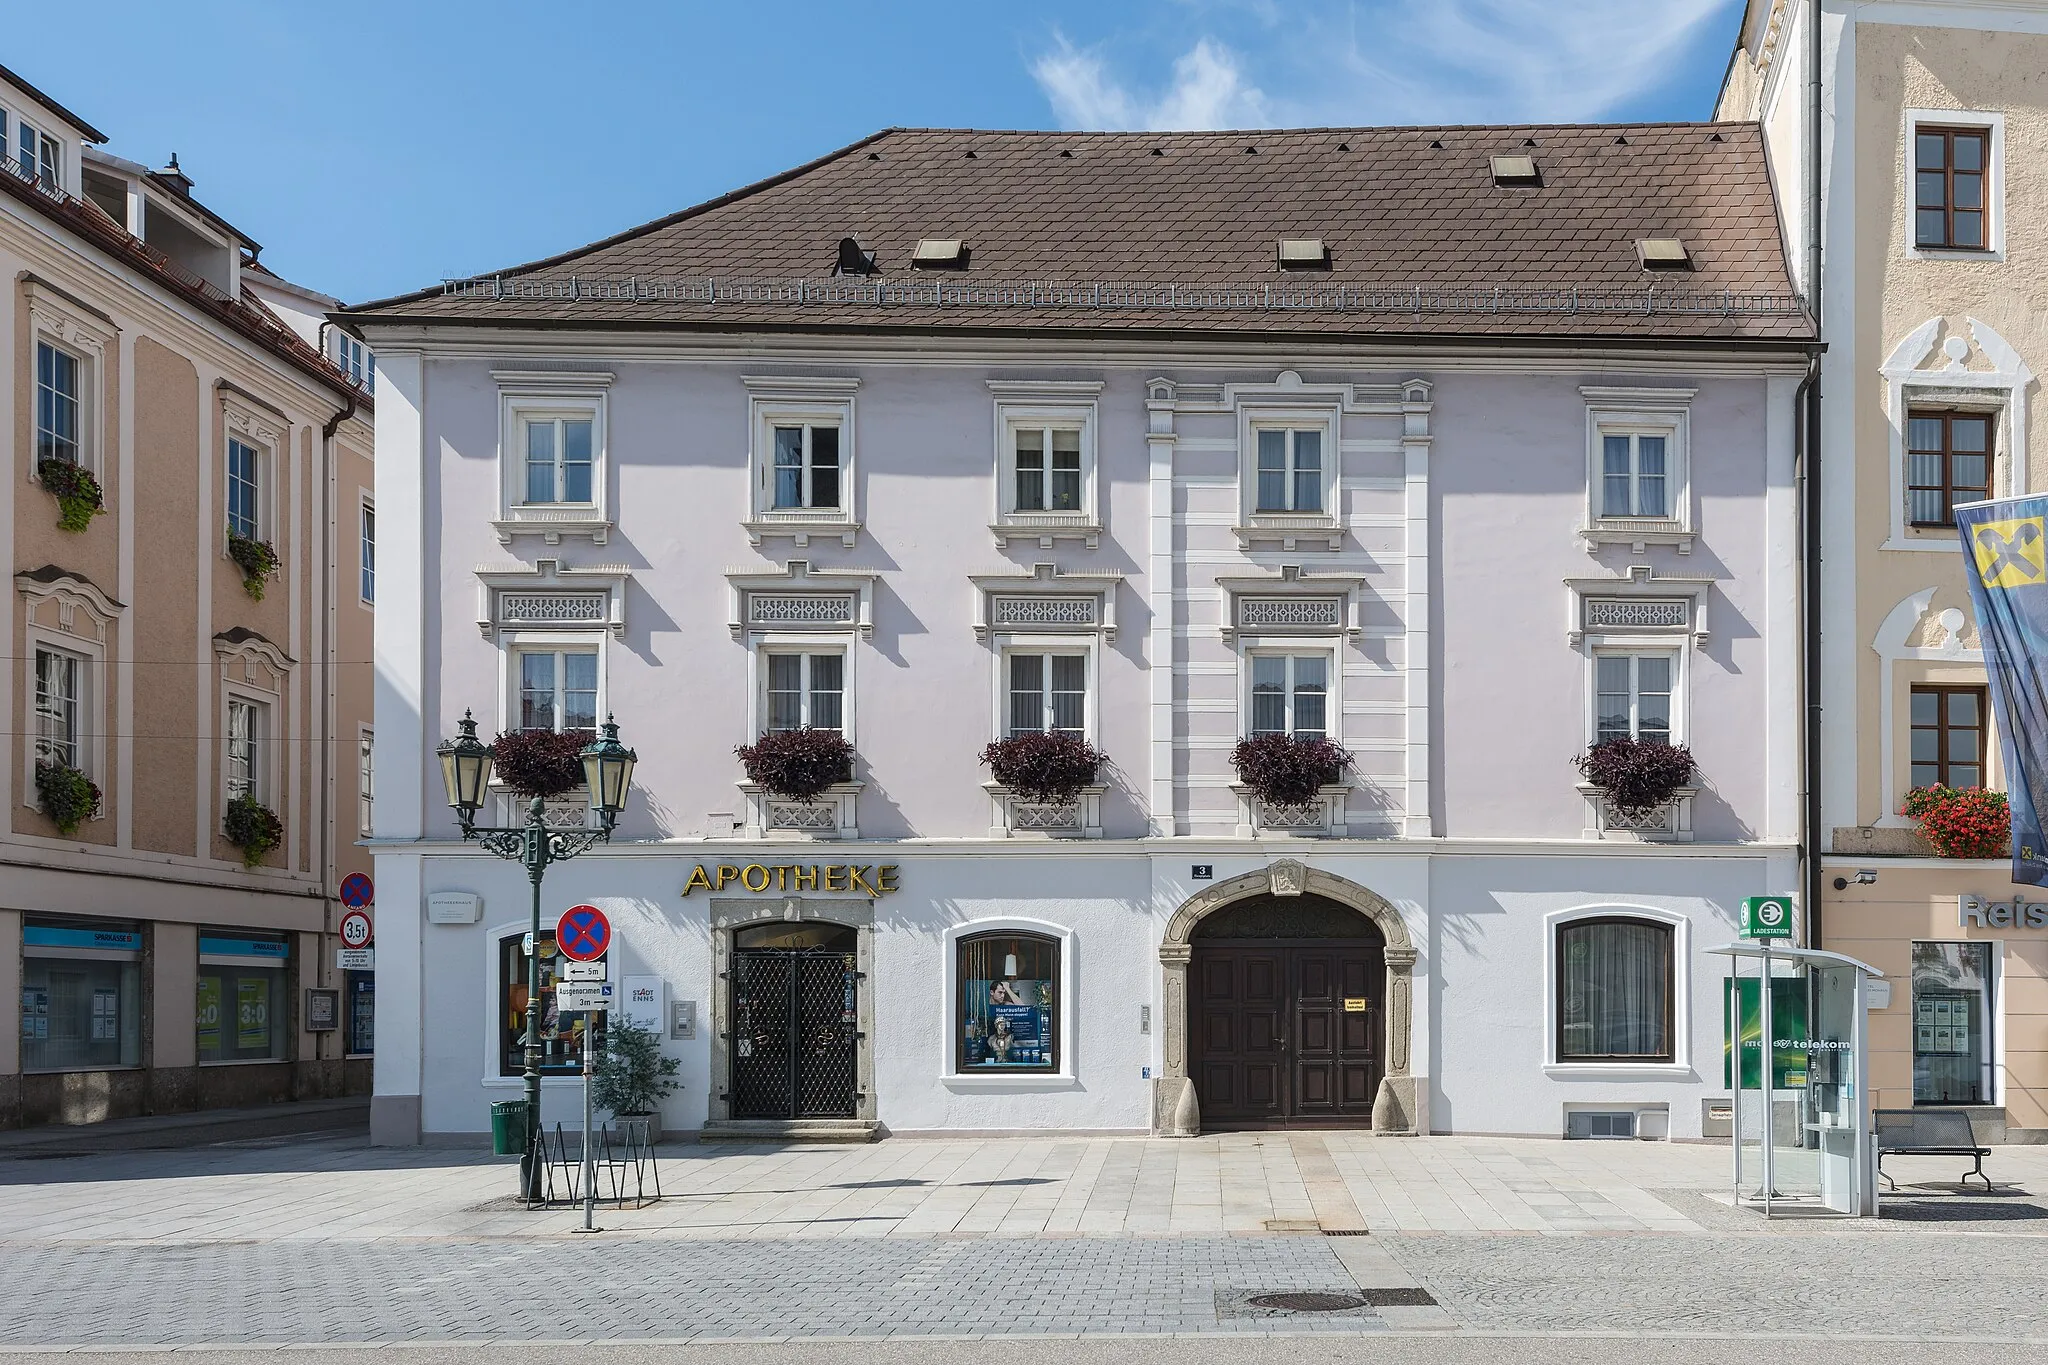 Photo showing: The house No. 3 on town square of Enns, Upper Austria, houses a pharmacy and is protected as cultural heritage monument.